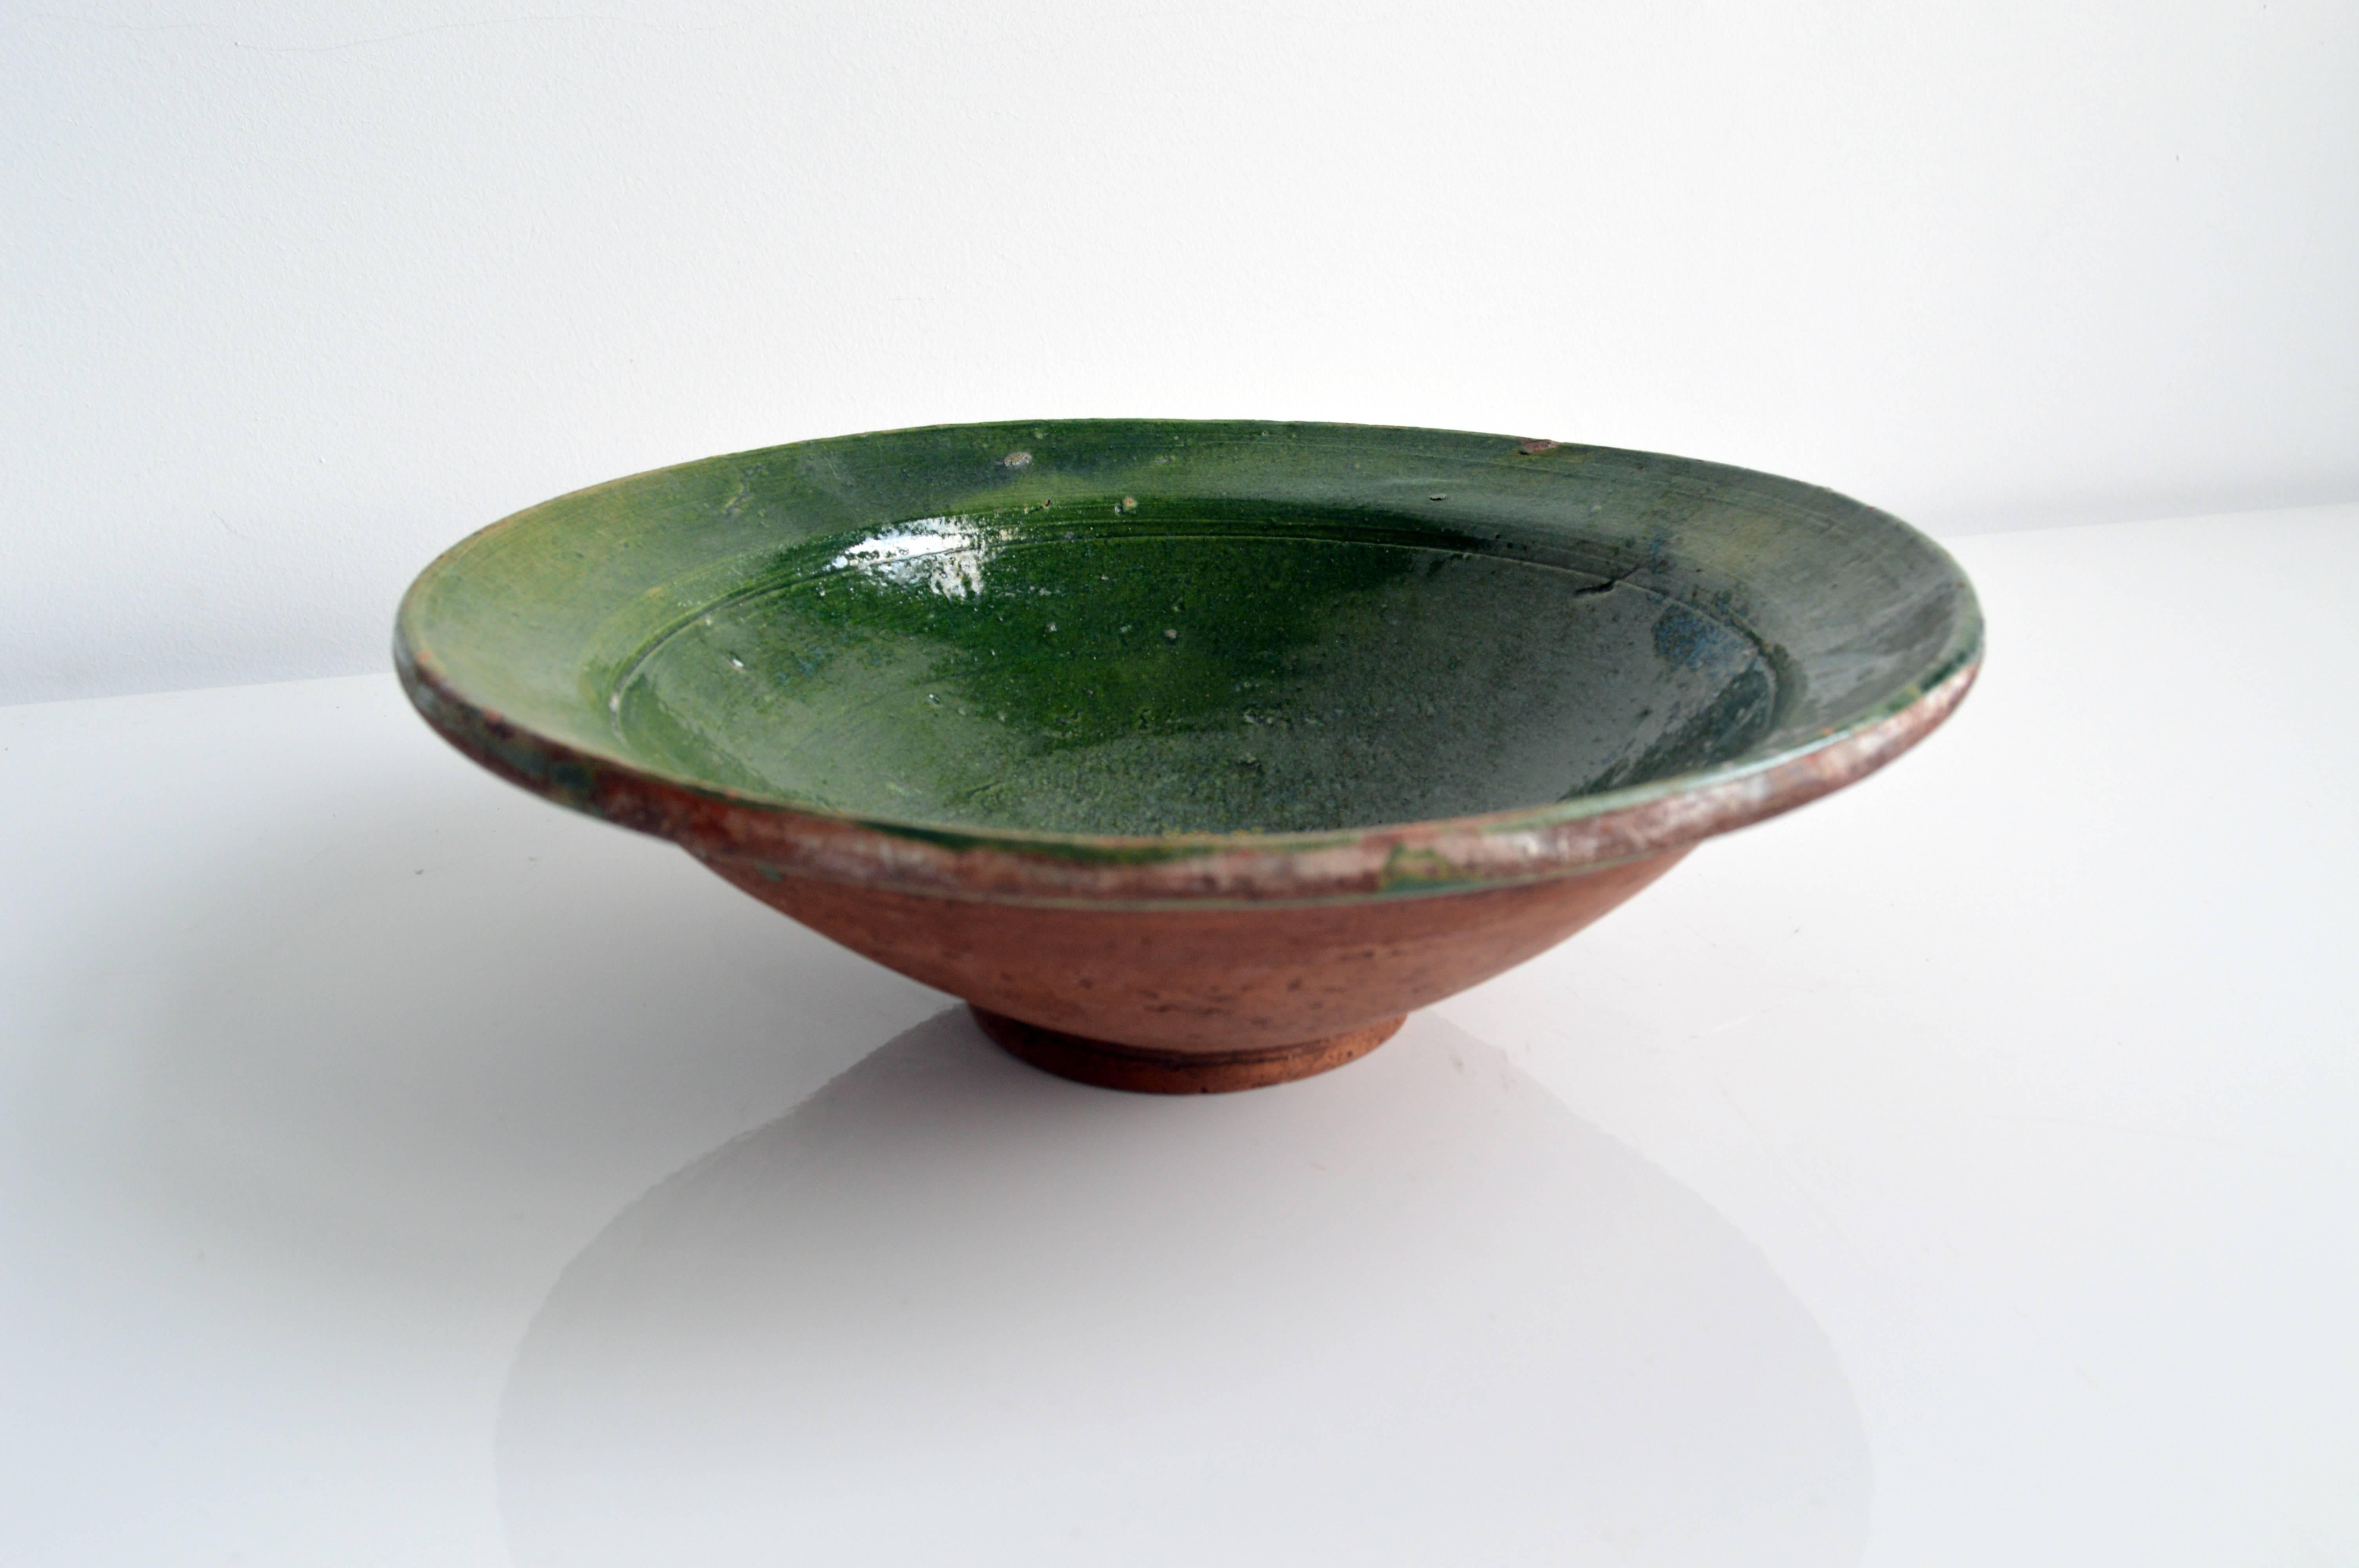 Vintage ceramic bowl with glazed green interior and natural ceramic exterior. Perfect decorative display piece, or put it to practical use as a fruit bowl.

Offered by Neal Beckstedt